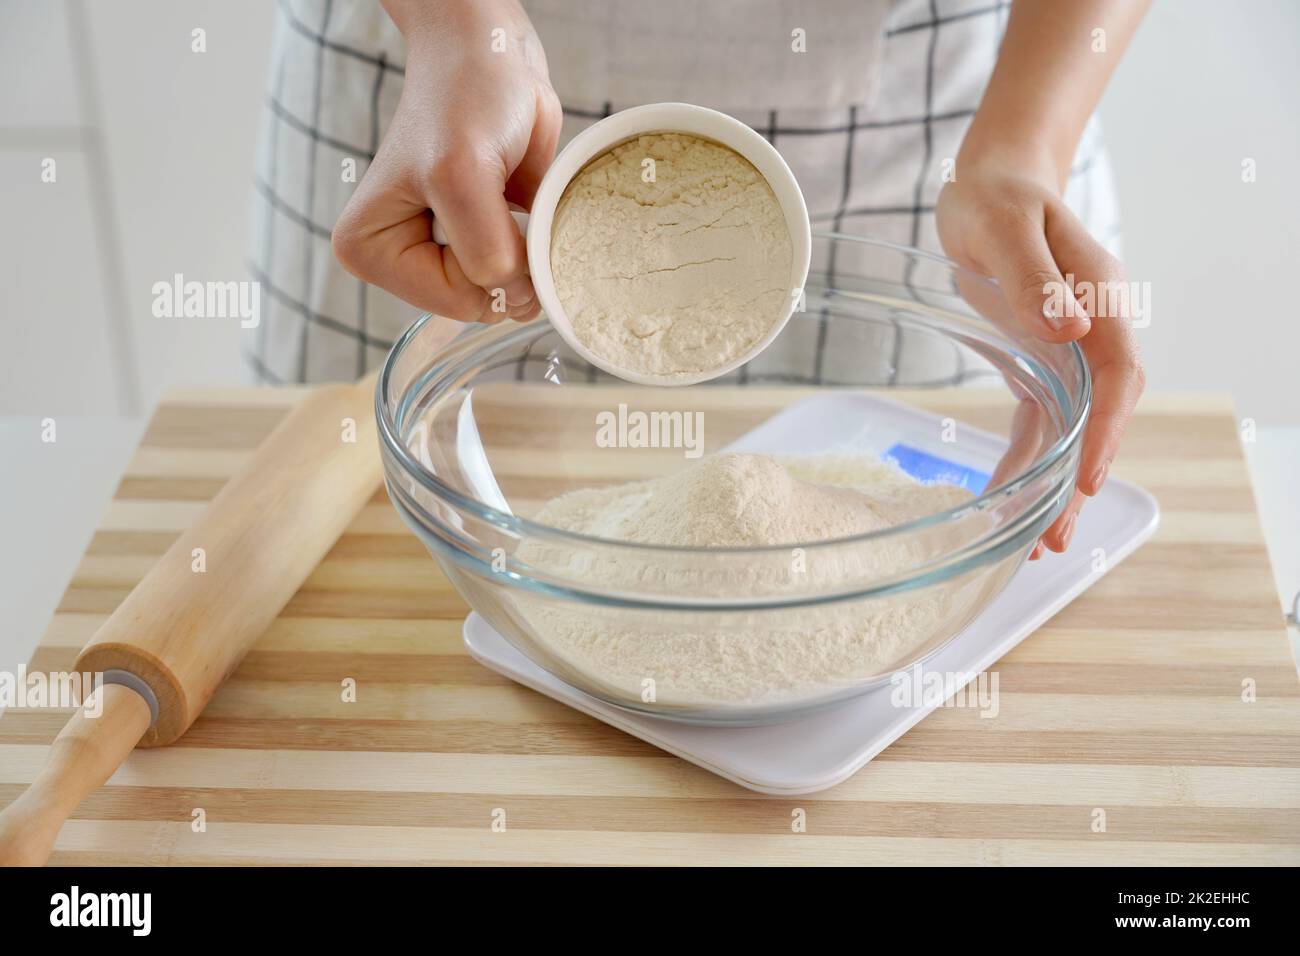 https://c8.alamy.com/comp/2K2EHHC/close-up-woman-weigh-the-flour-on-the-scales-increasing-price-of-wheat-flour-and-bread-homemade-bread-preparation-economic-crisis-2K2EHHC.jpg